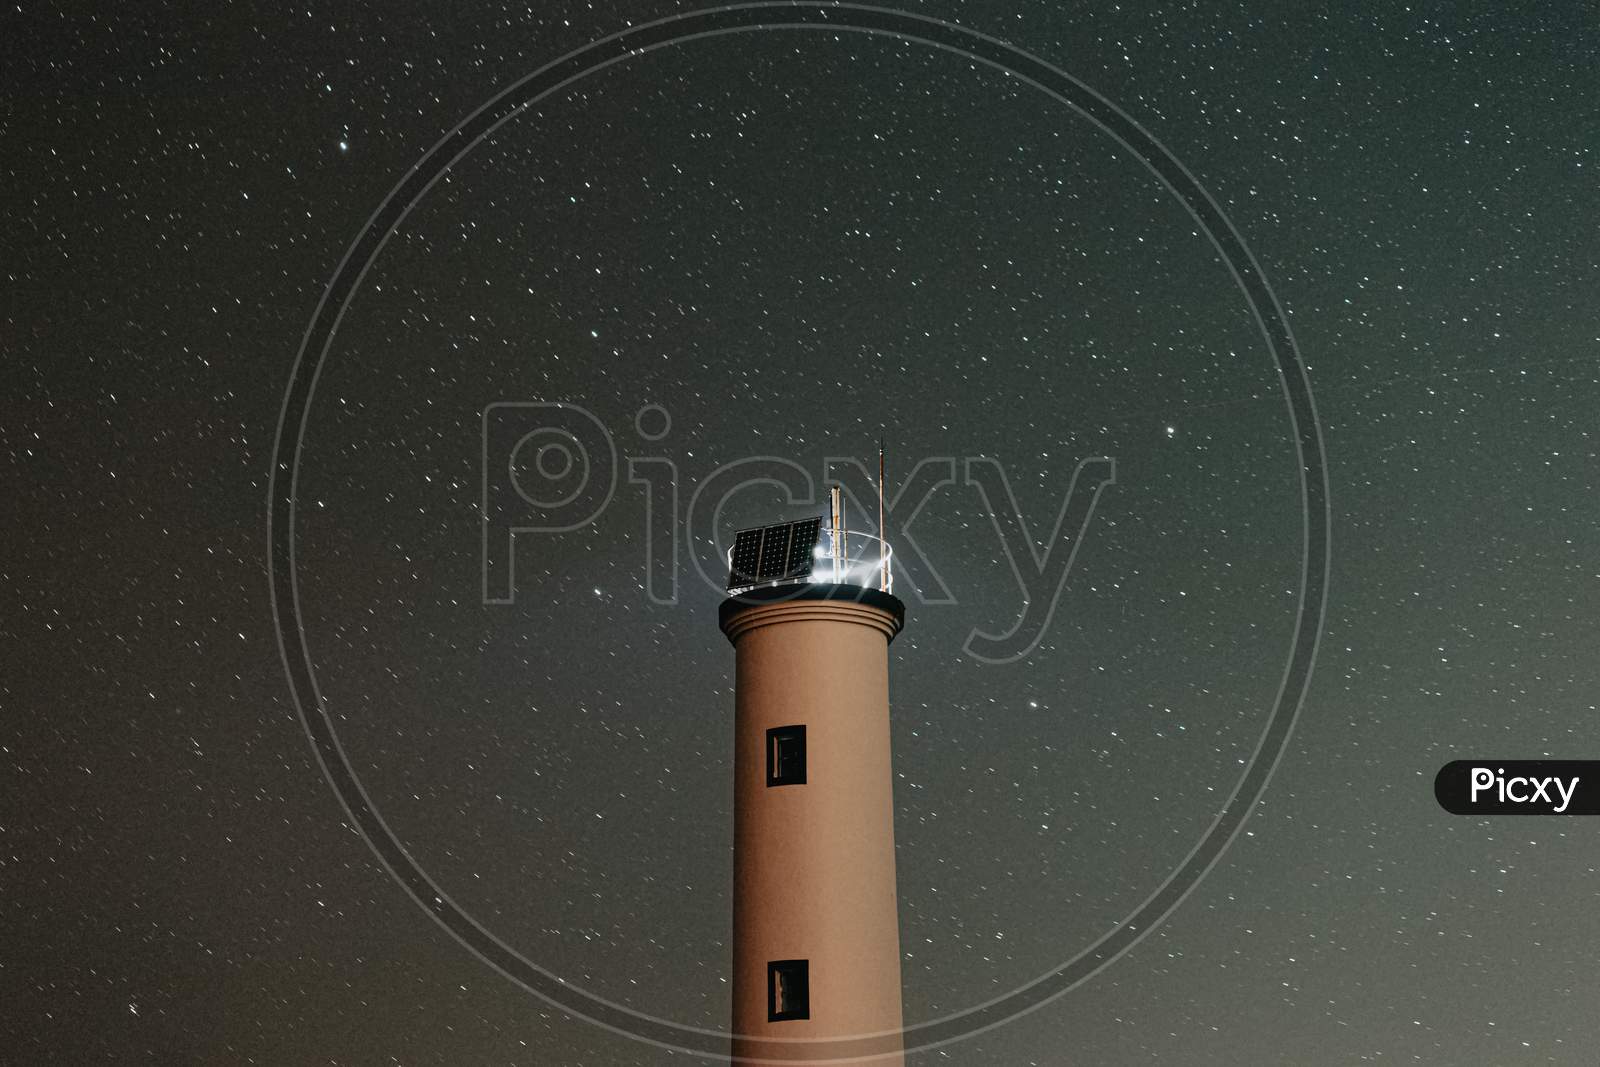 A Close Up Of A White Lighthouse With A Sky Filled Of Stars